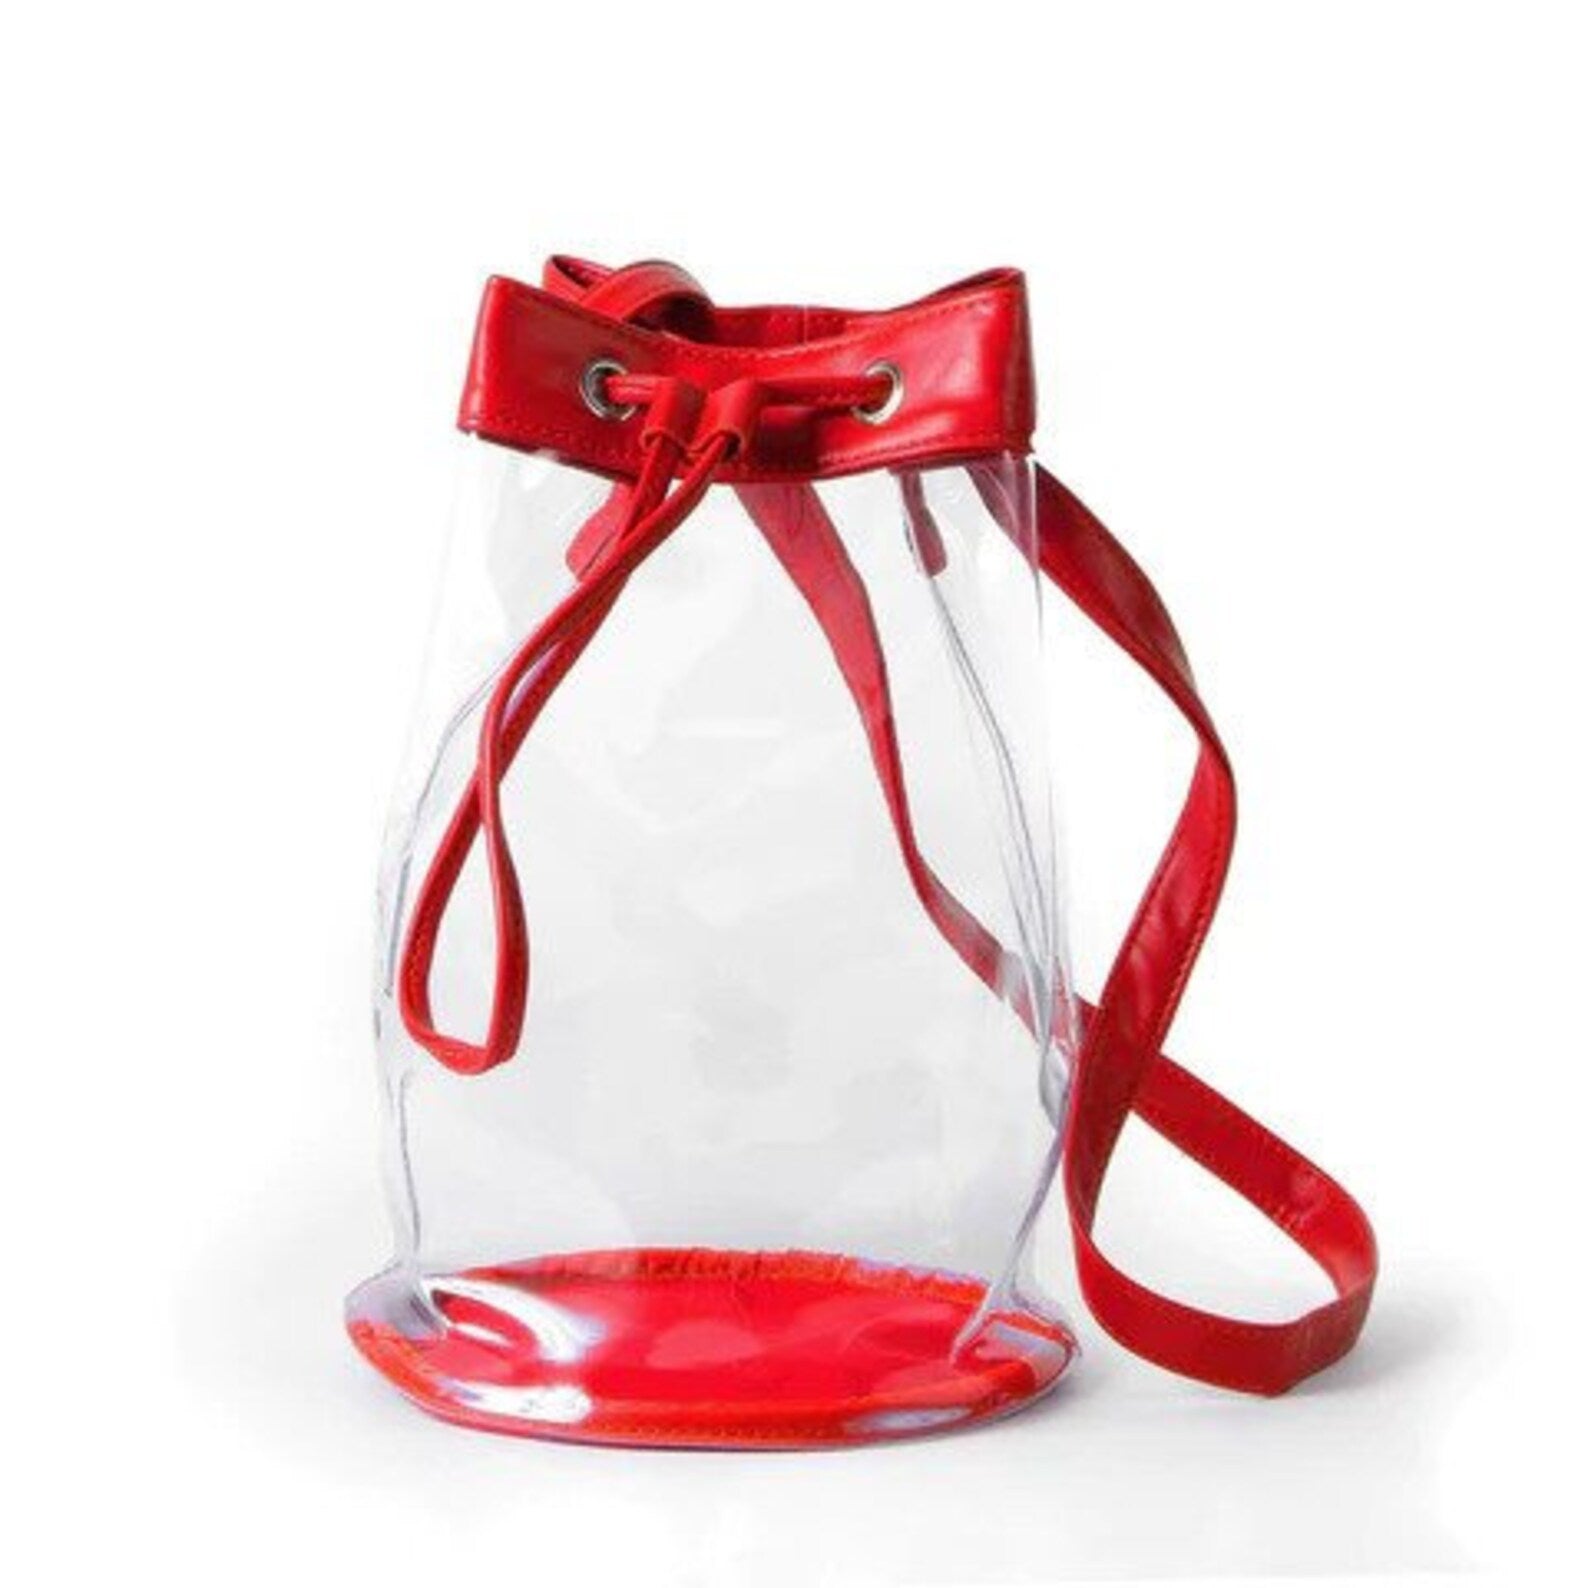 Stadium Approved Clear Bucket Bag - Red Trim